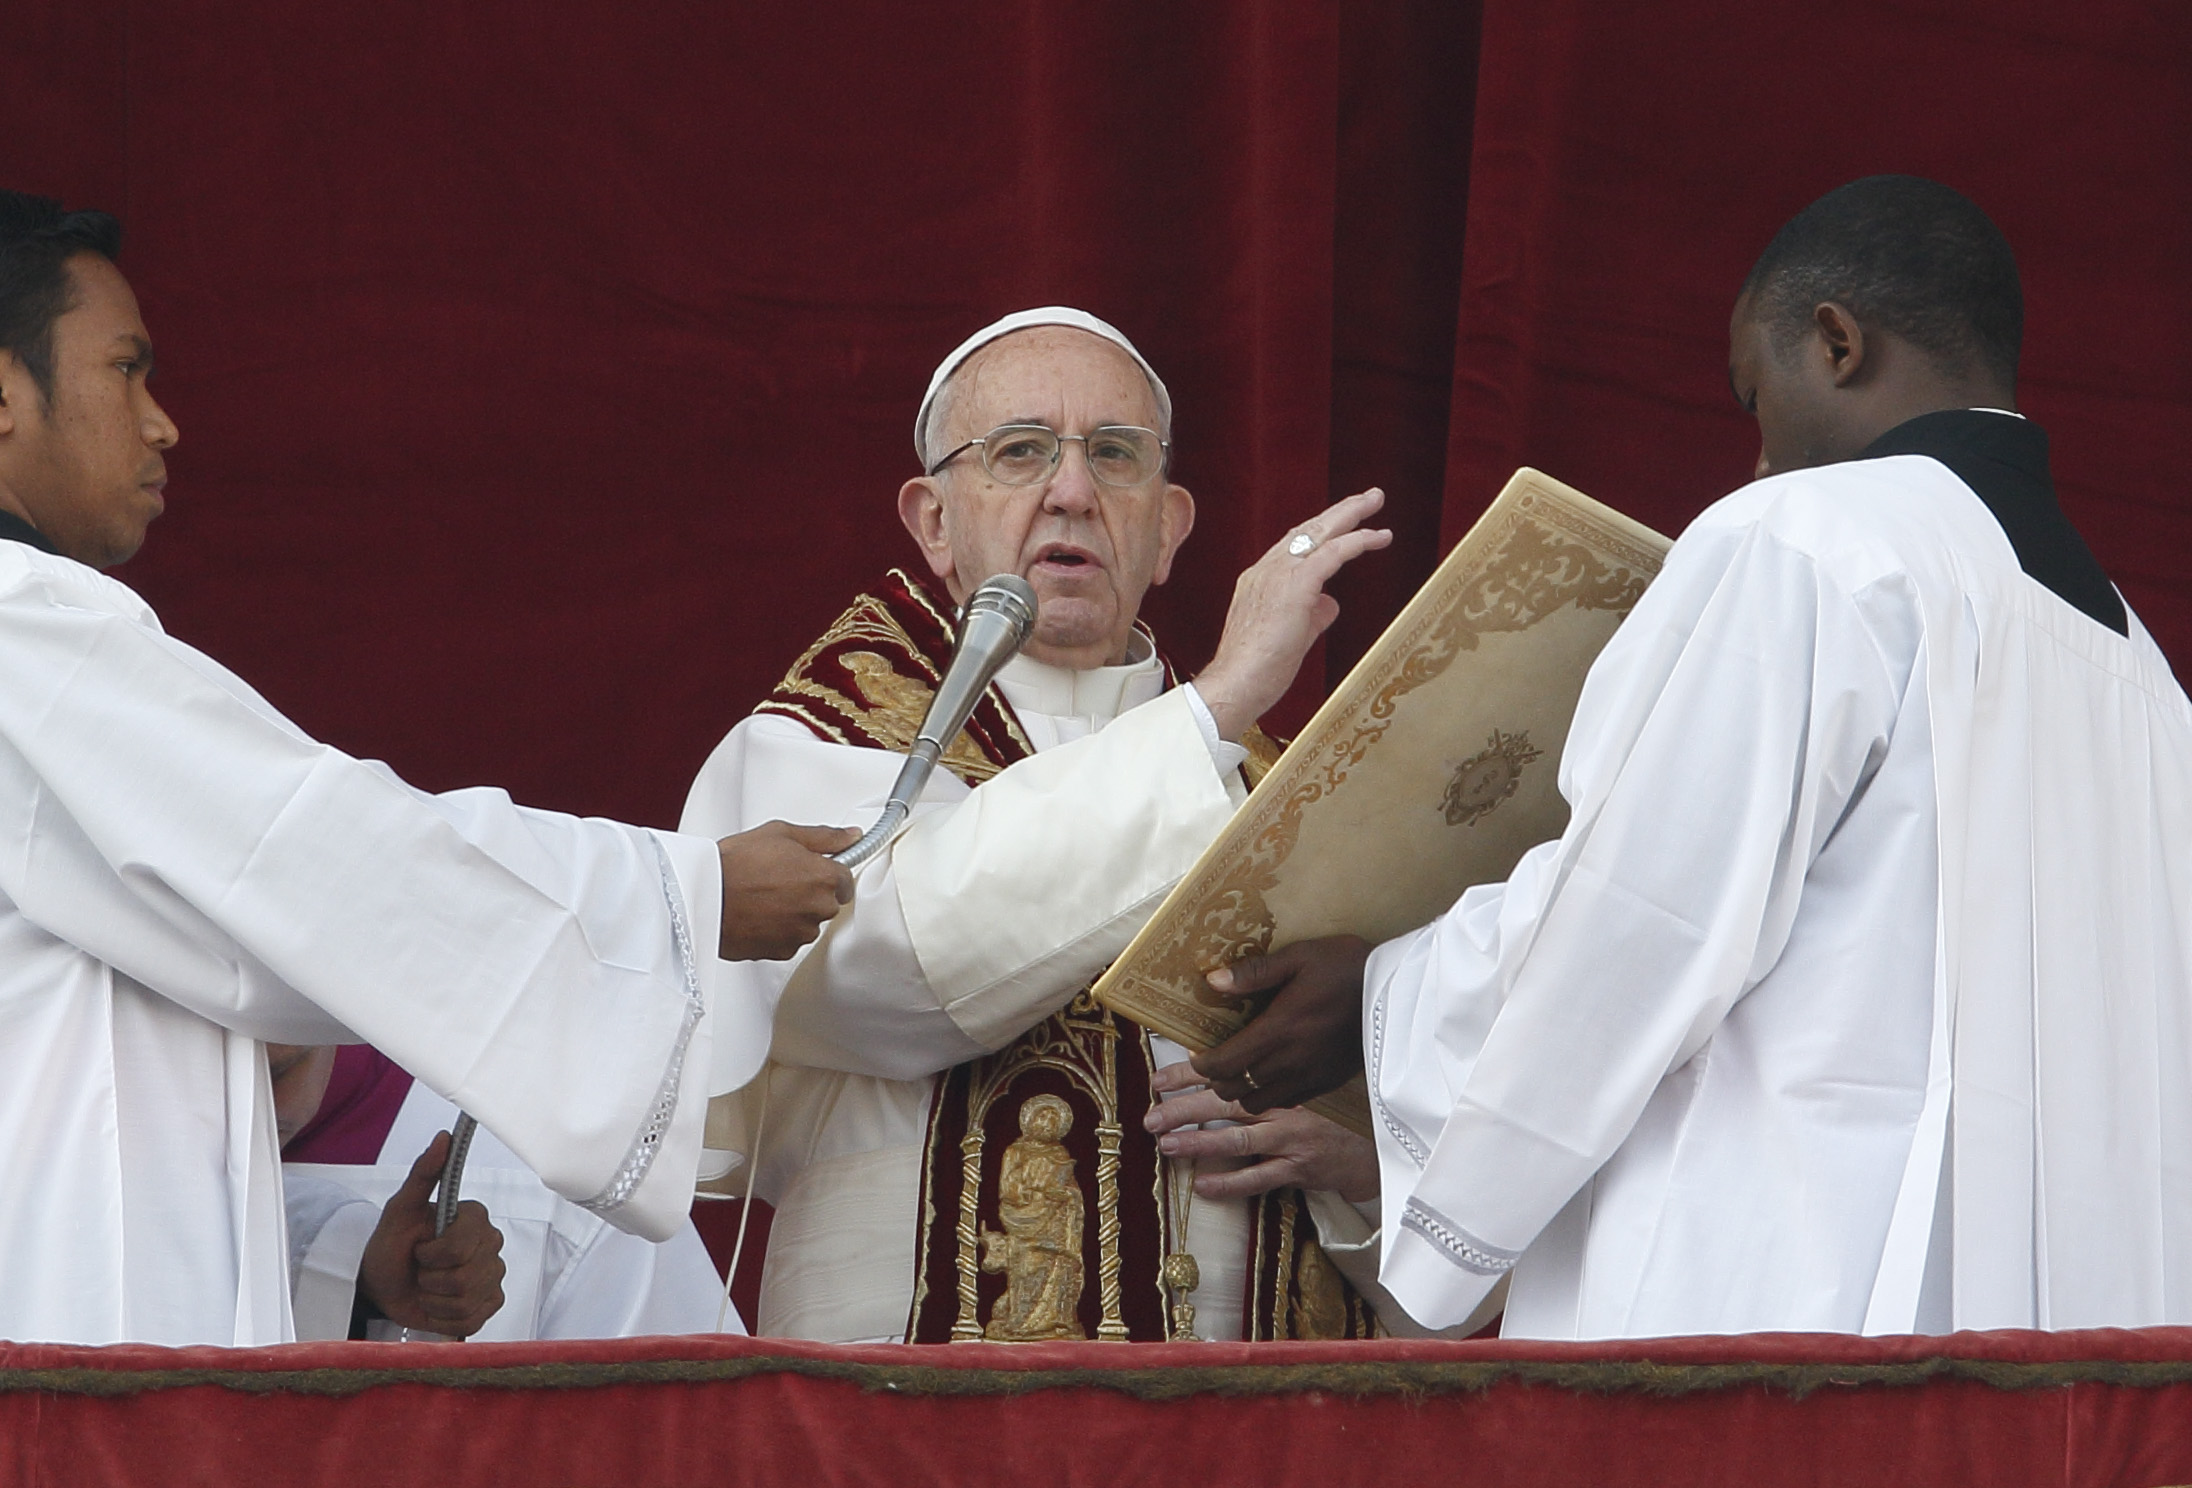 Pope Francis delivers his Christmas blessing "urbi et orbi" (to the city and the world) from the central balcony of St. Peter's Basilica at the Vatican Dec. 25. (CNS photo/Paul Haring)